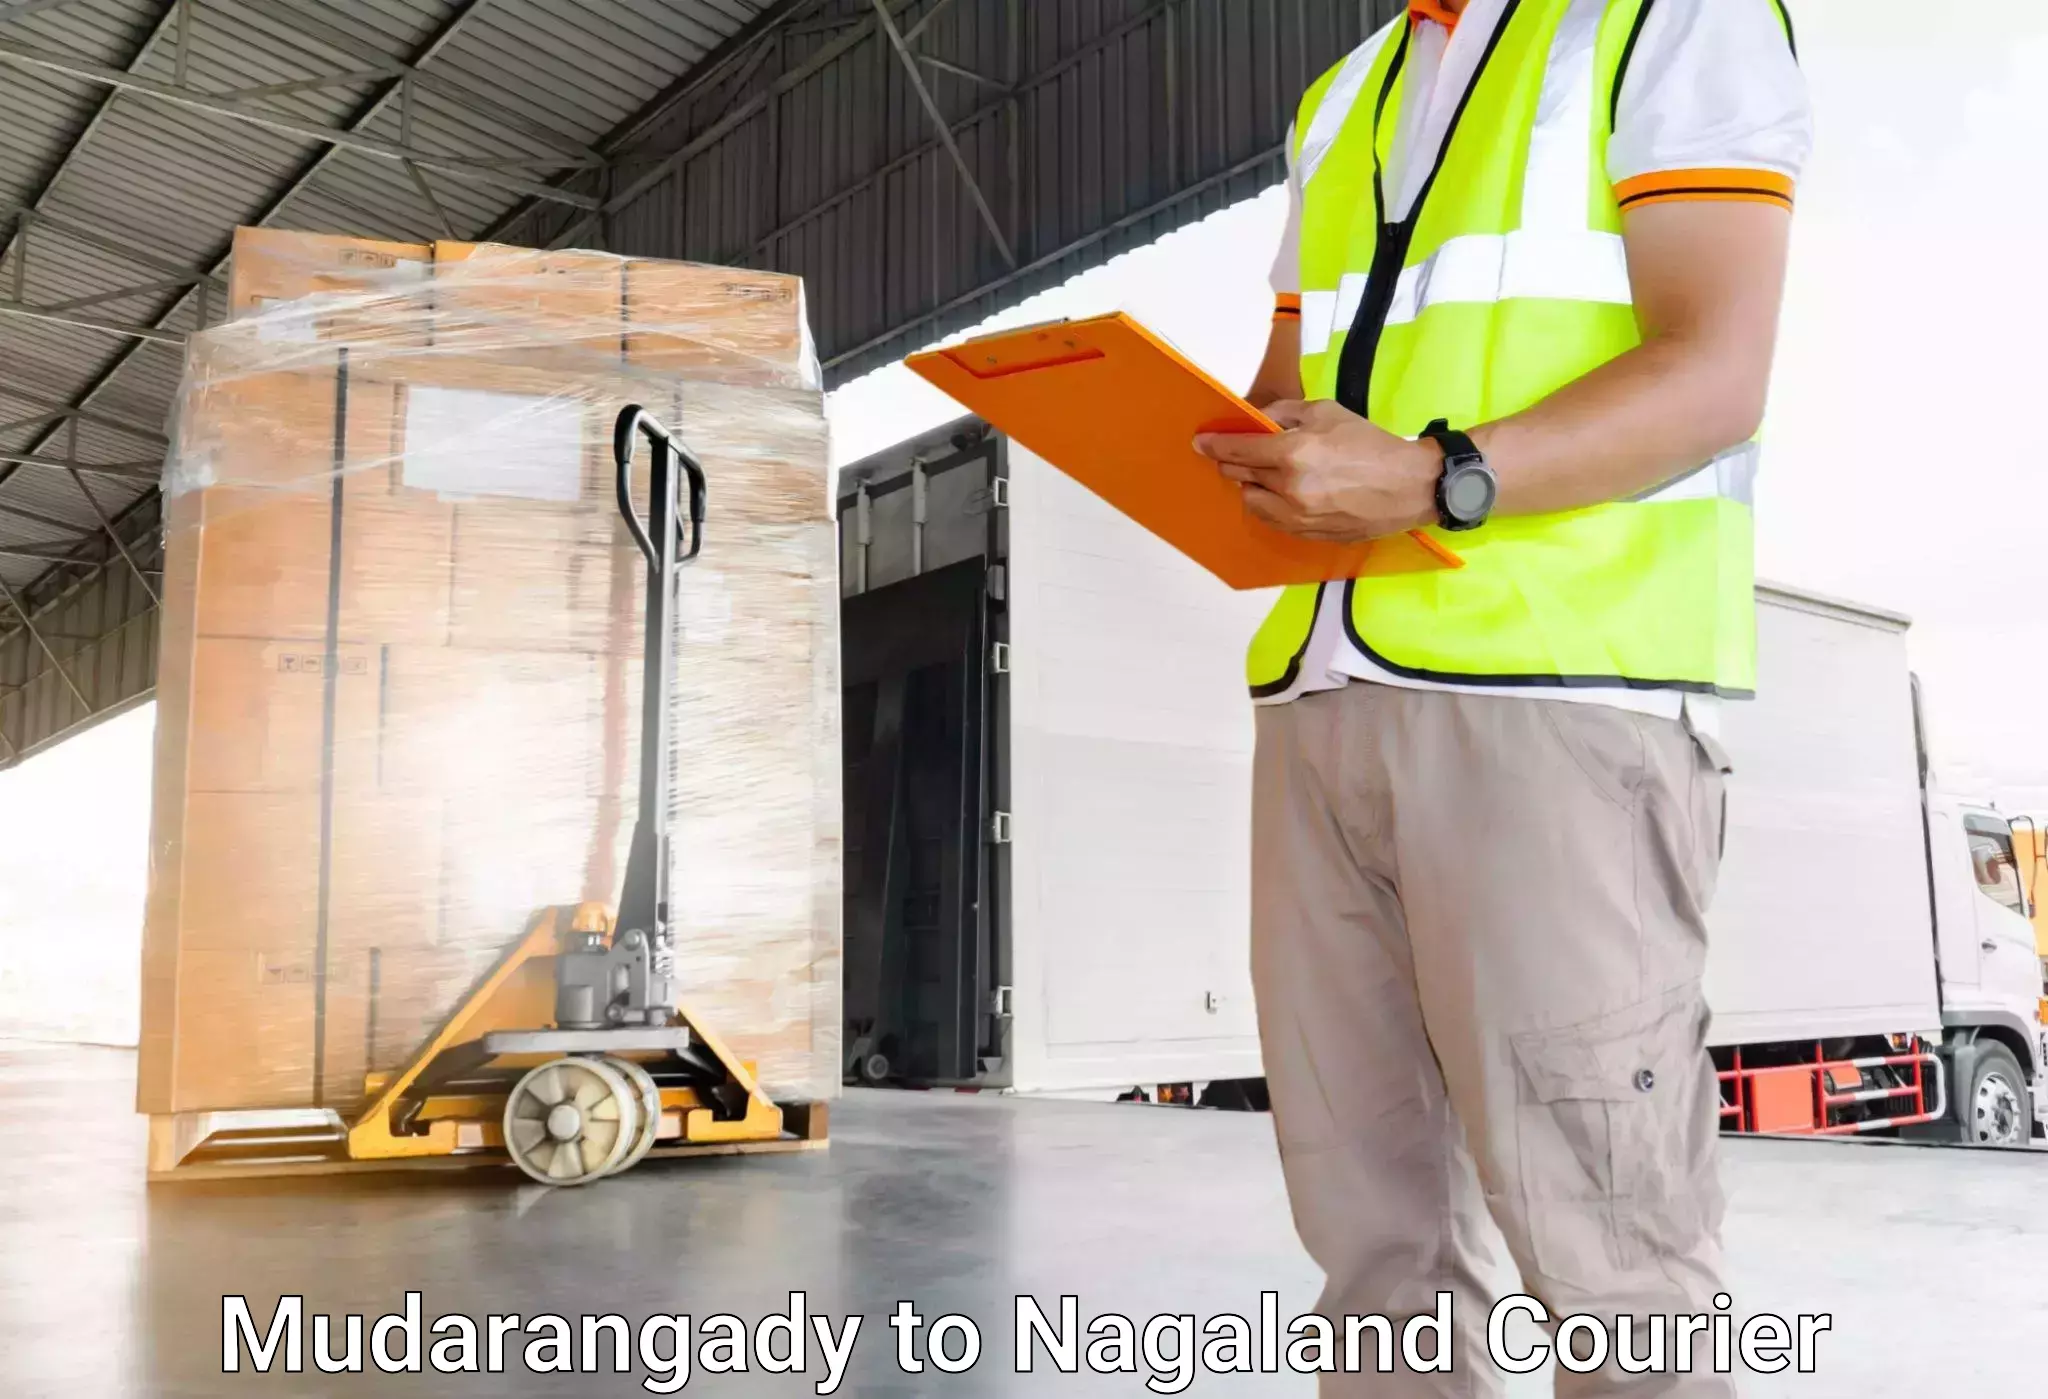 Luggage transport consultancy Mudarangady to Mon